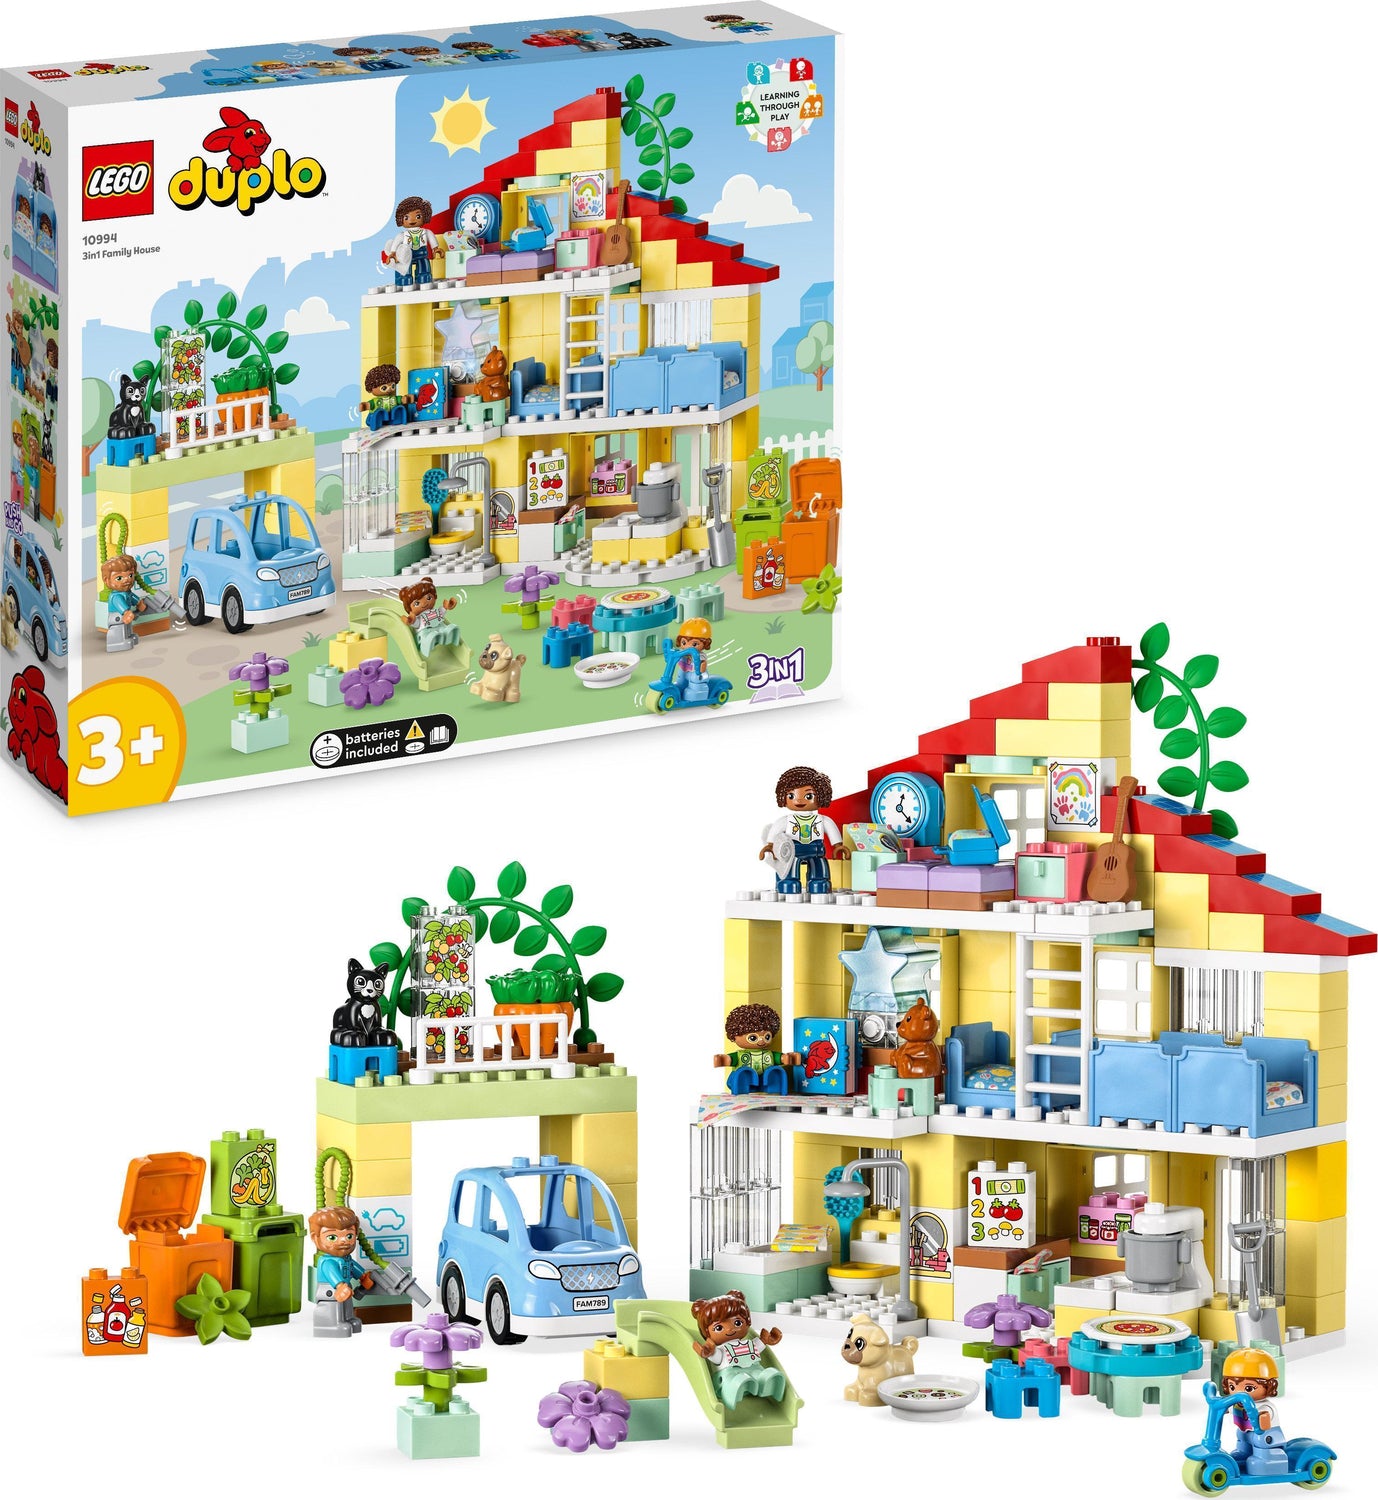 LEGO DUPLO 3 in 1 Family House Set with Toy Car